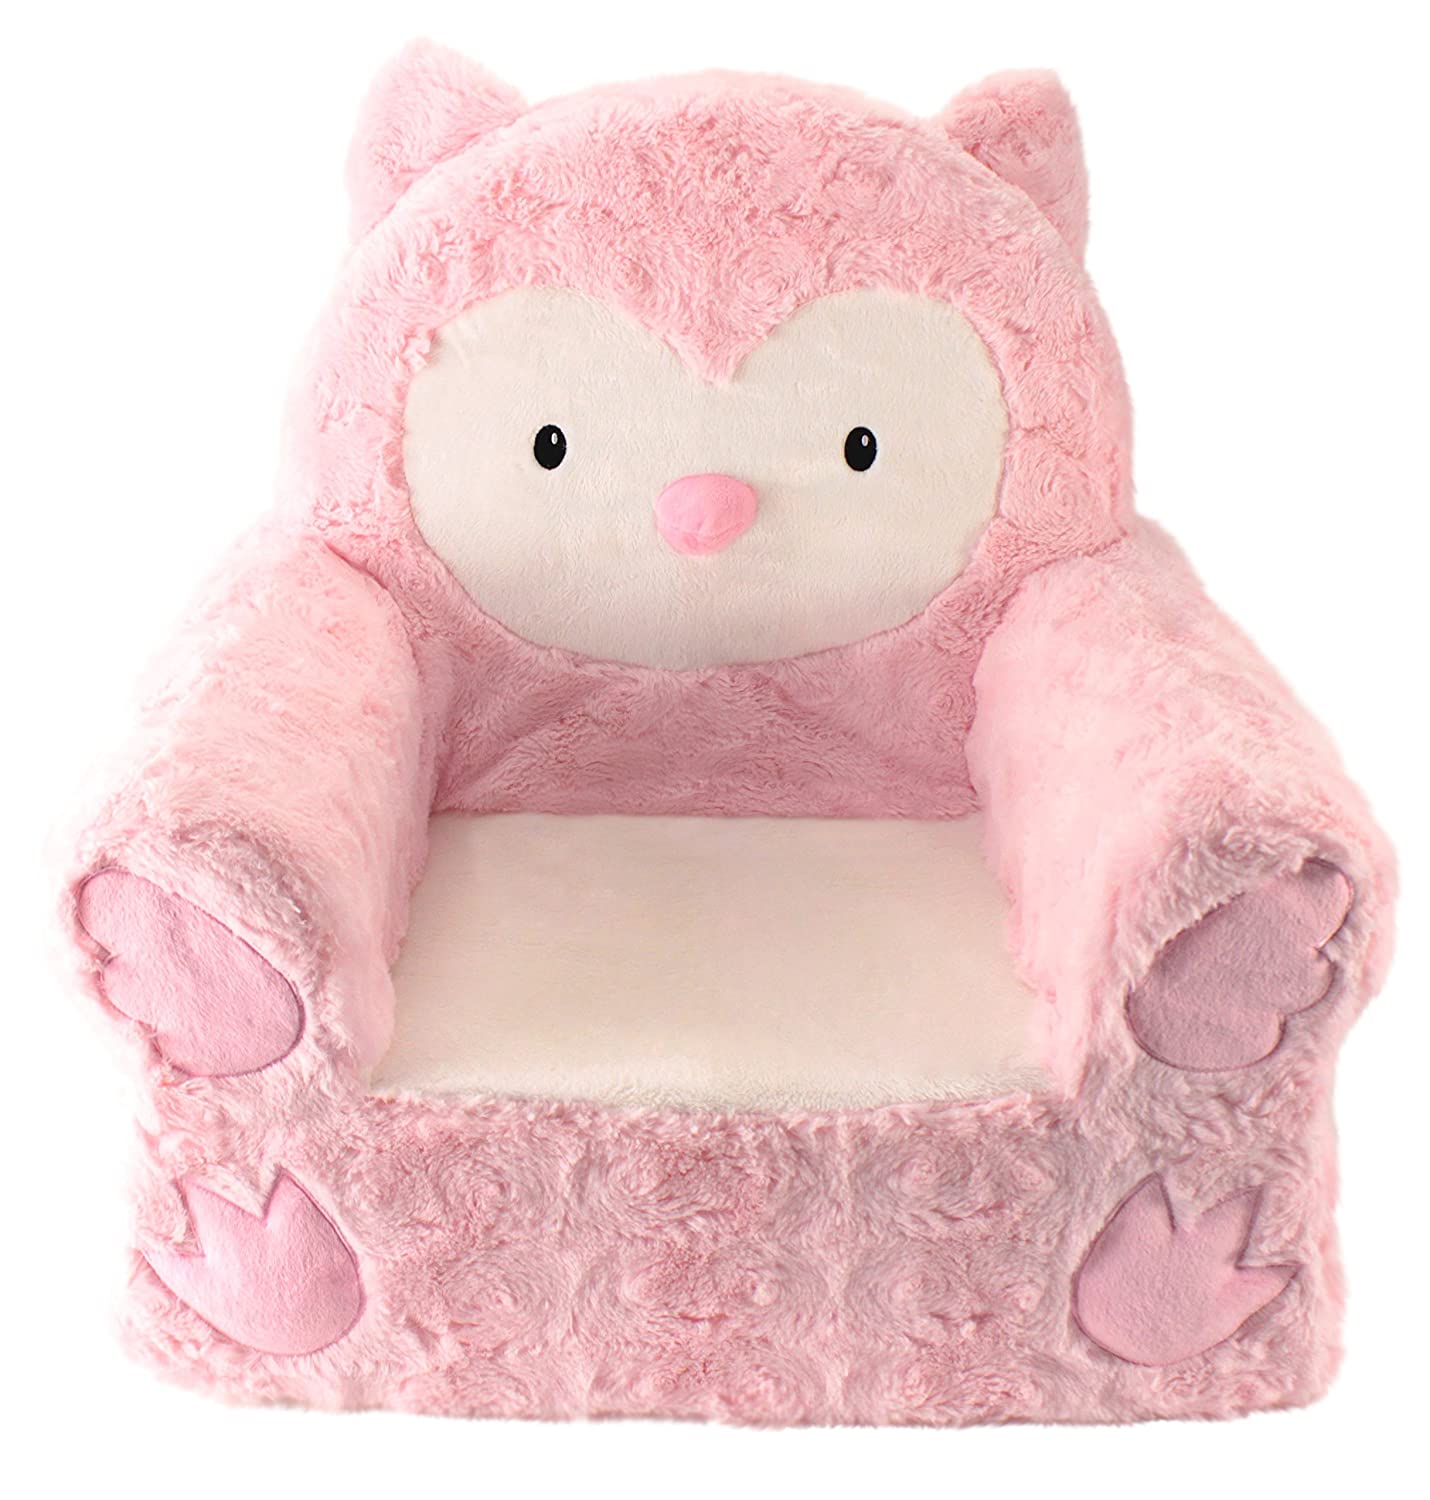 Animal Adventure Sweet SeatsPink Owl Children's ChairLarge SizeMachine Washable Cover